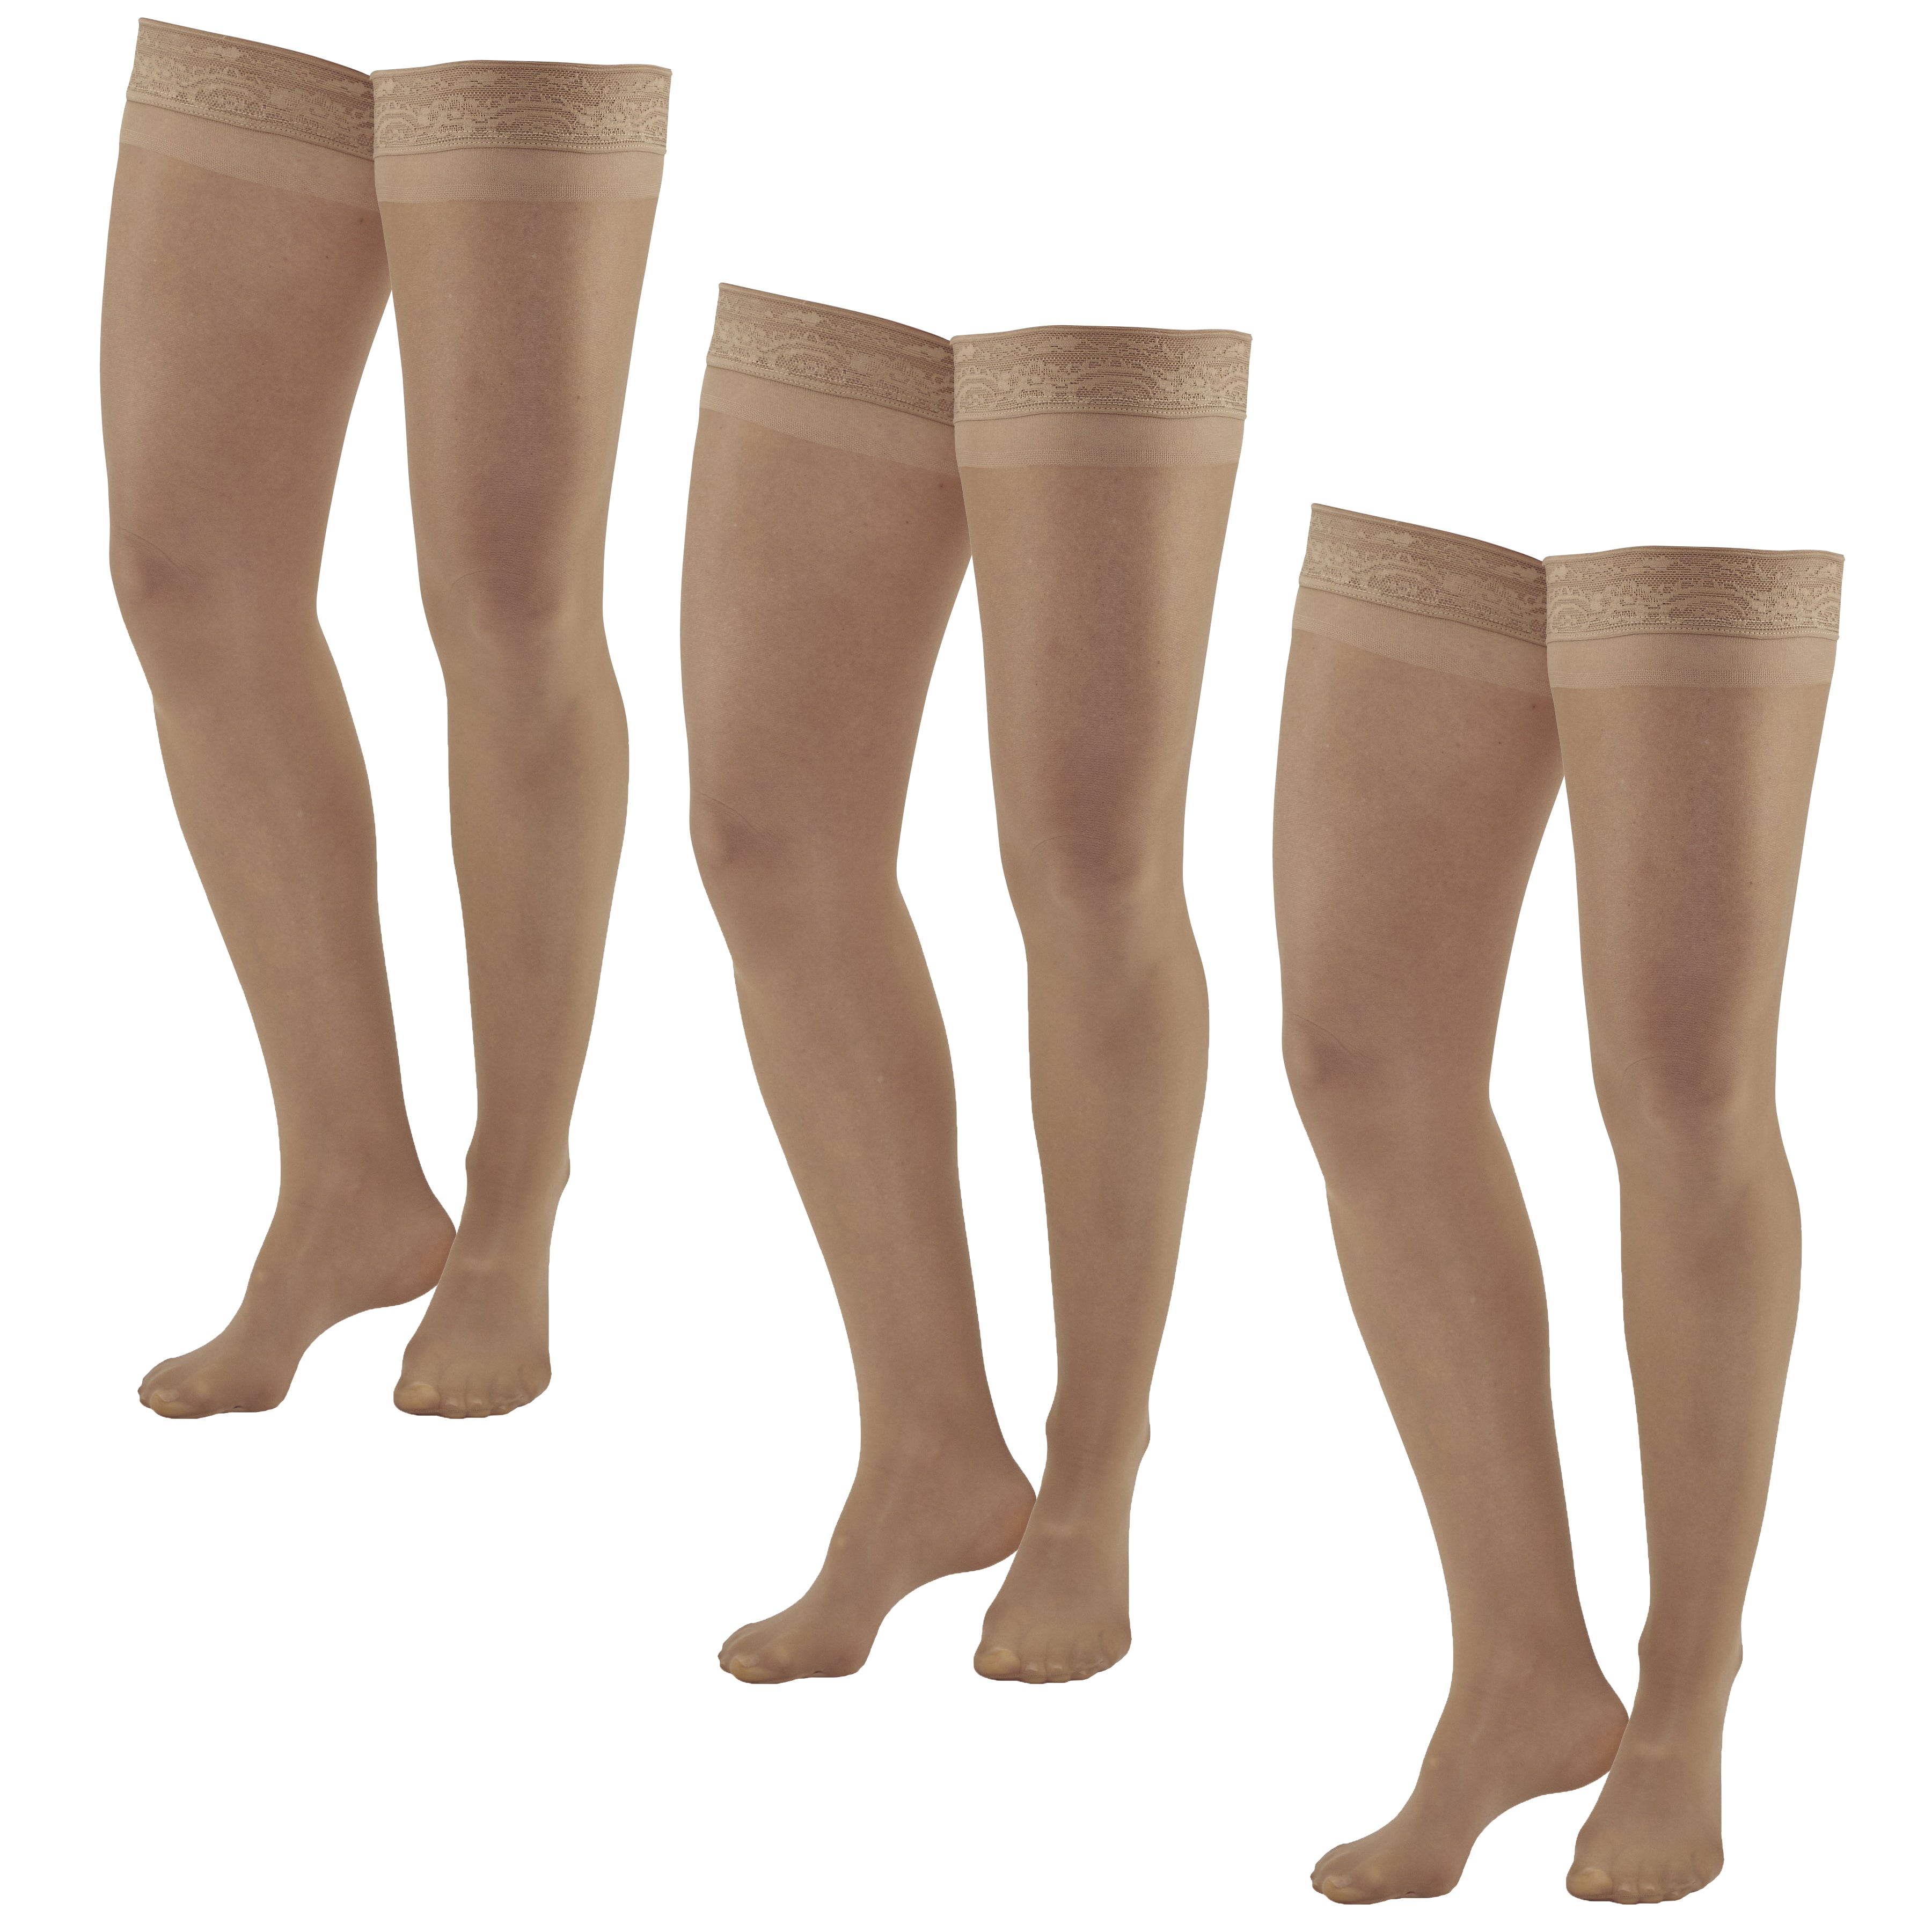 AW Style 74 Soft Sheer Thigh Highs w/Band - 8-15 mmHg (3 Pack